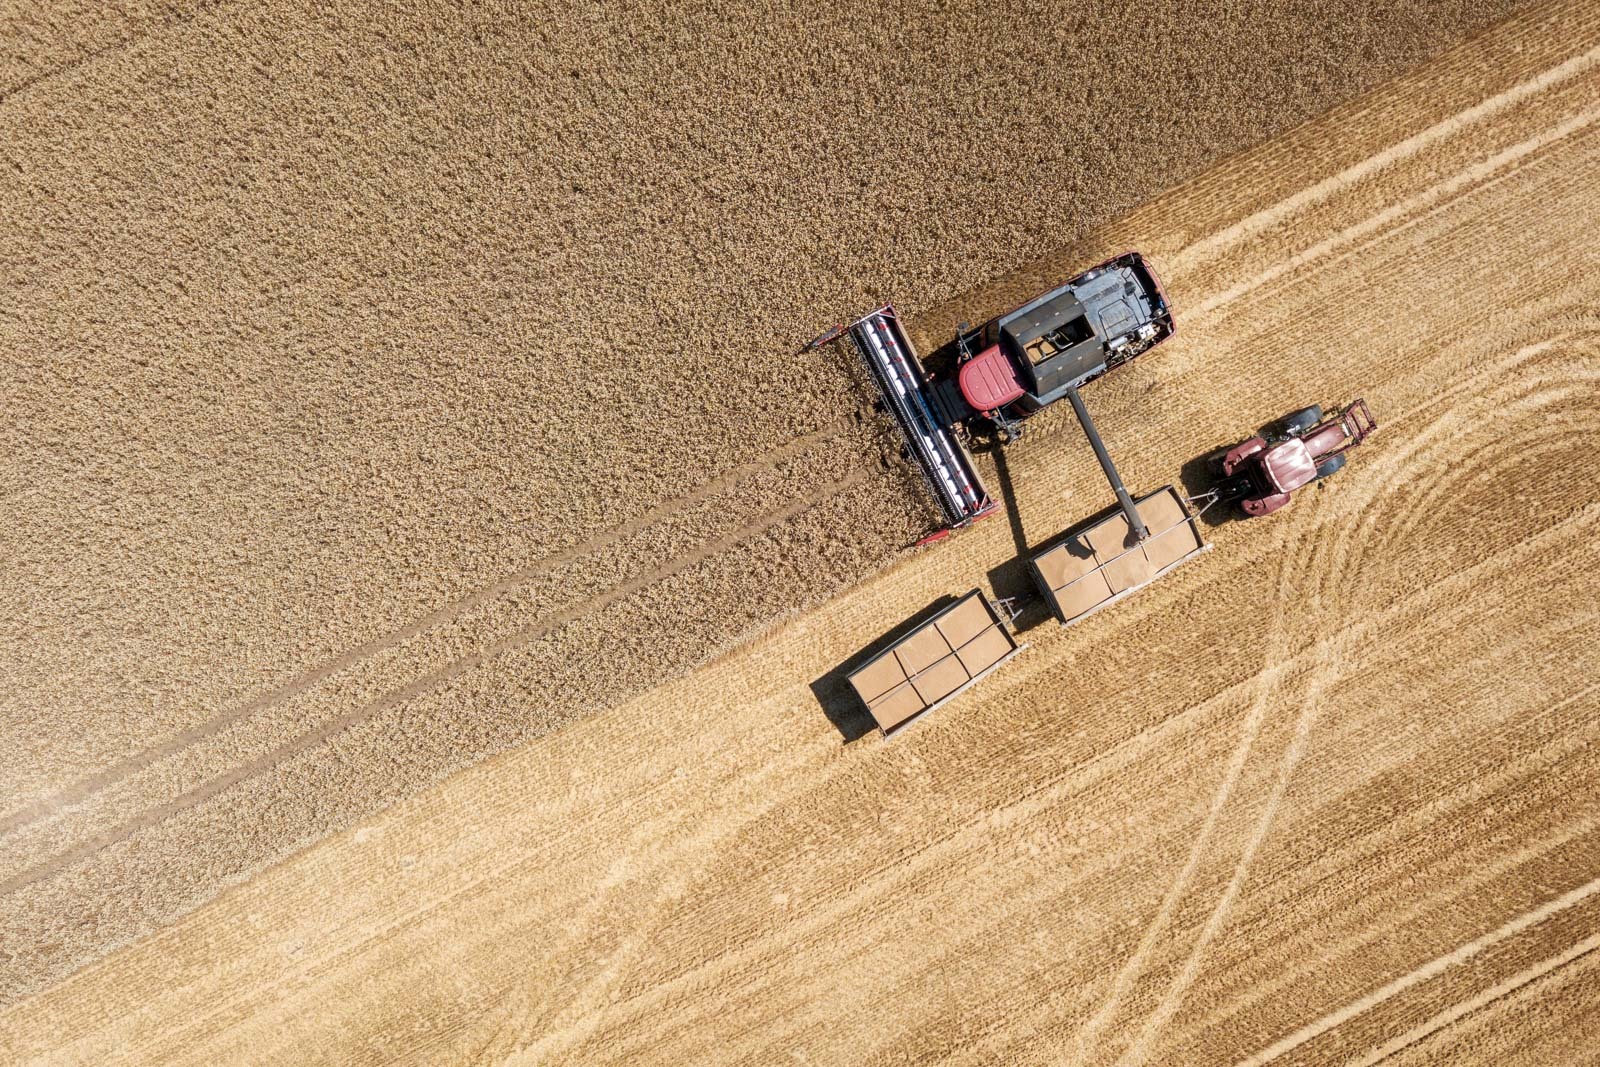 A combine harvester and tractor harvesting wheat from a crop field